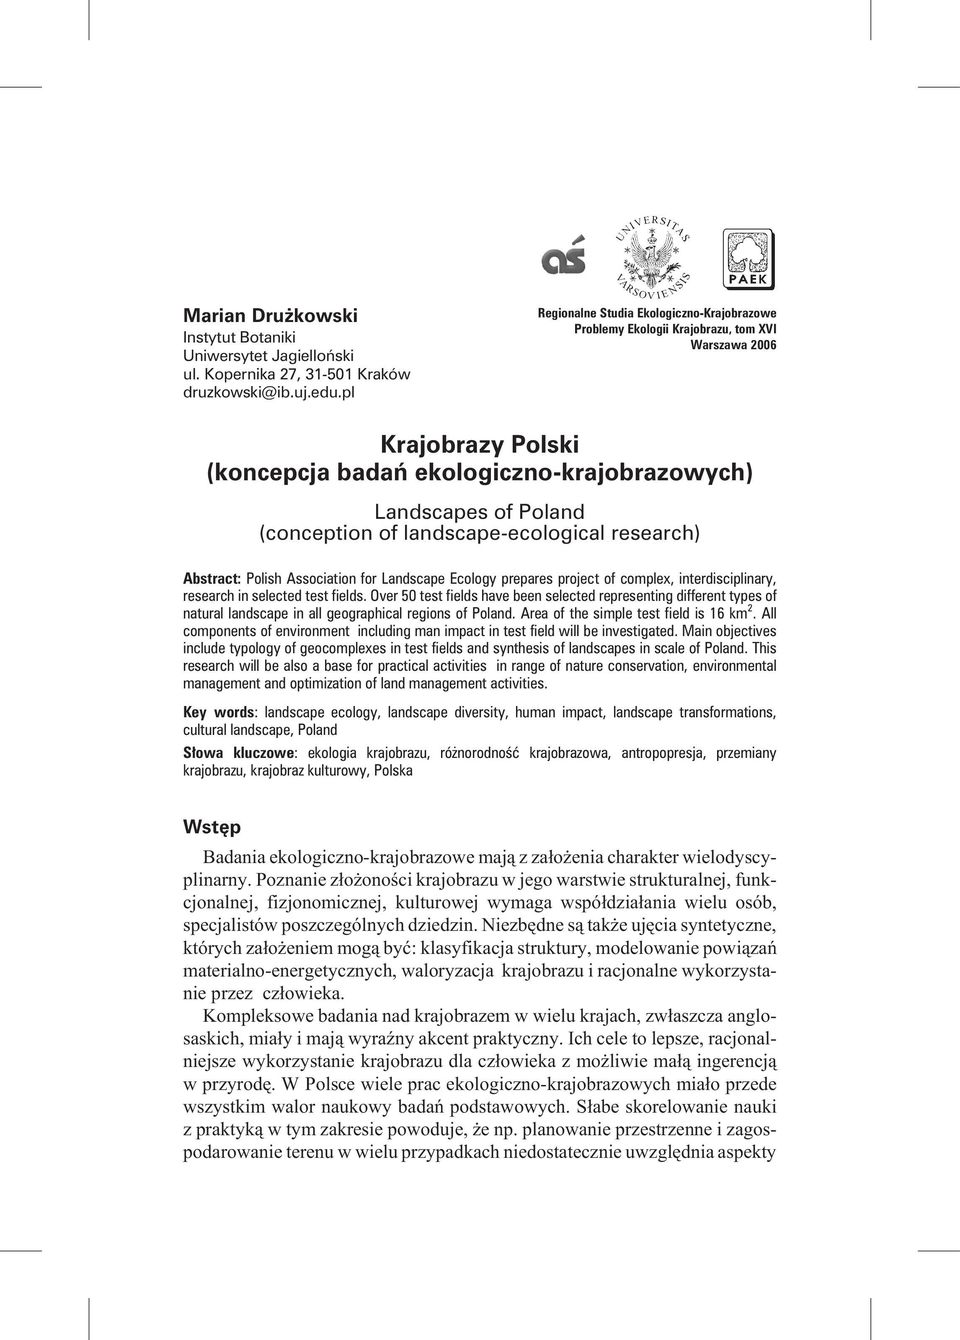 (conception of landscape-ecological research) Abs tract: Polish Association for Landscape Ecology prepares project of complex, interdisciplinary, re se arch in se le c ted test fields.